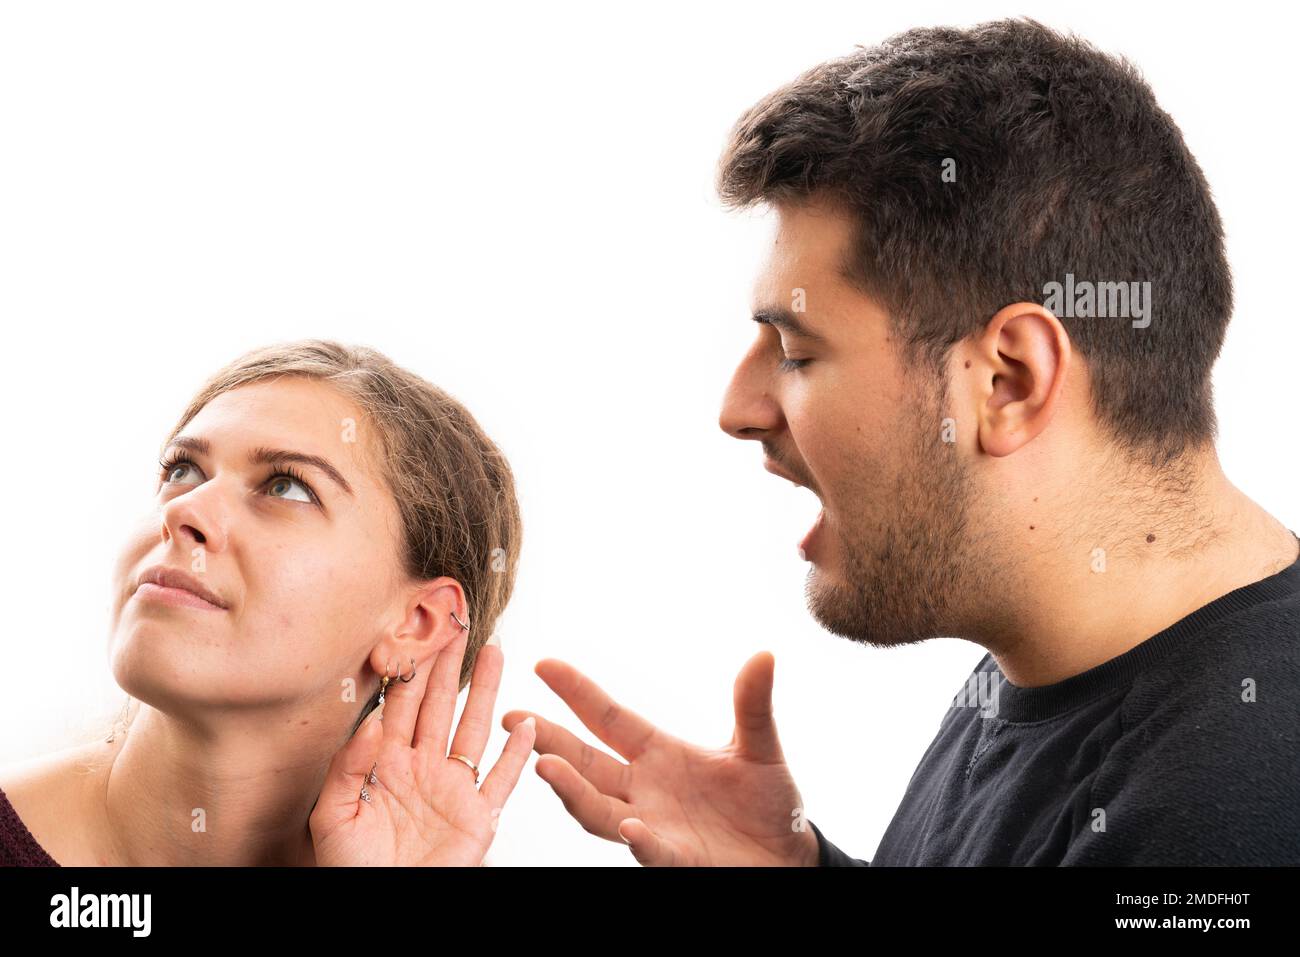 Adult girlfriend making listening gesture with hand to ear while boyfriend yelling talking as relationship communication concept isolated on white stu Stock Photo